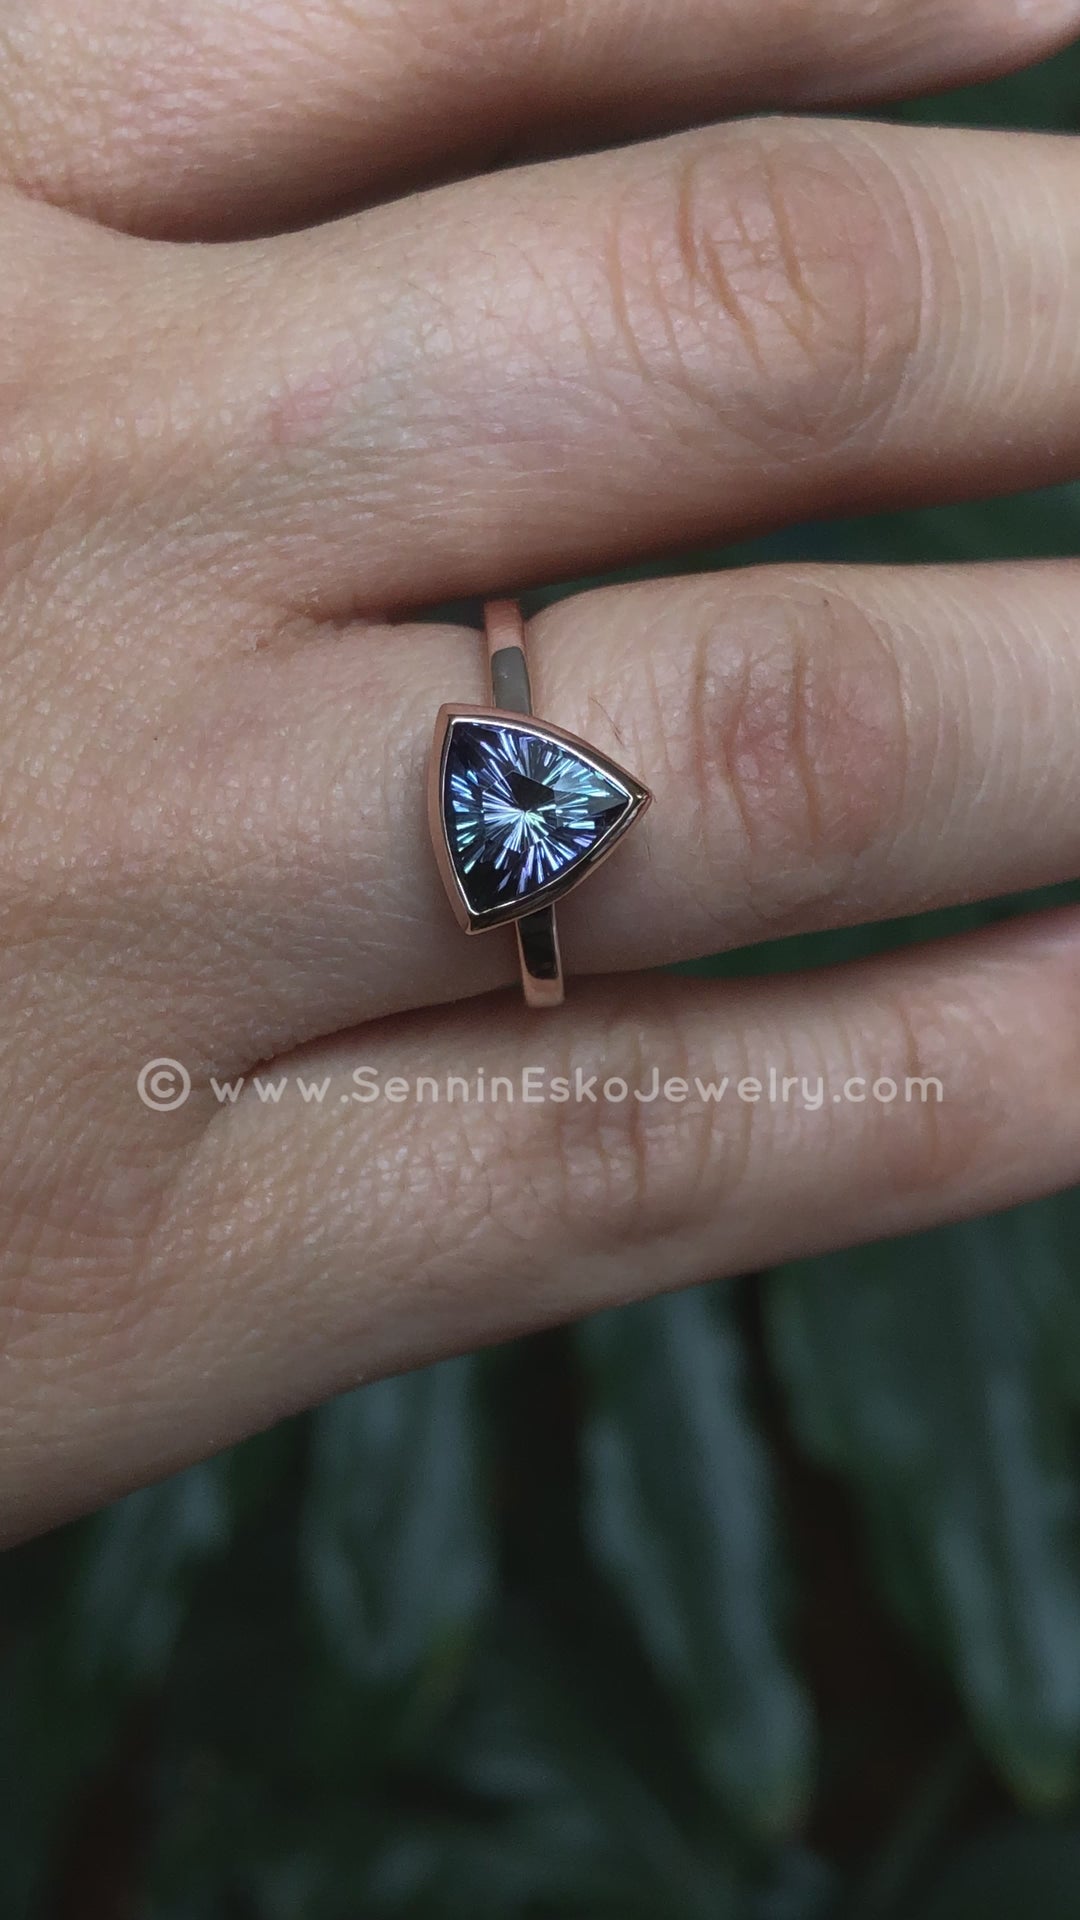 Medium Weight Bezel Ring Setting with a Rectangular Band - Tanzanite Depicted (Setting Only, Center Stone Sold Separately)